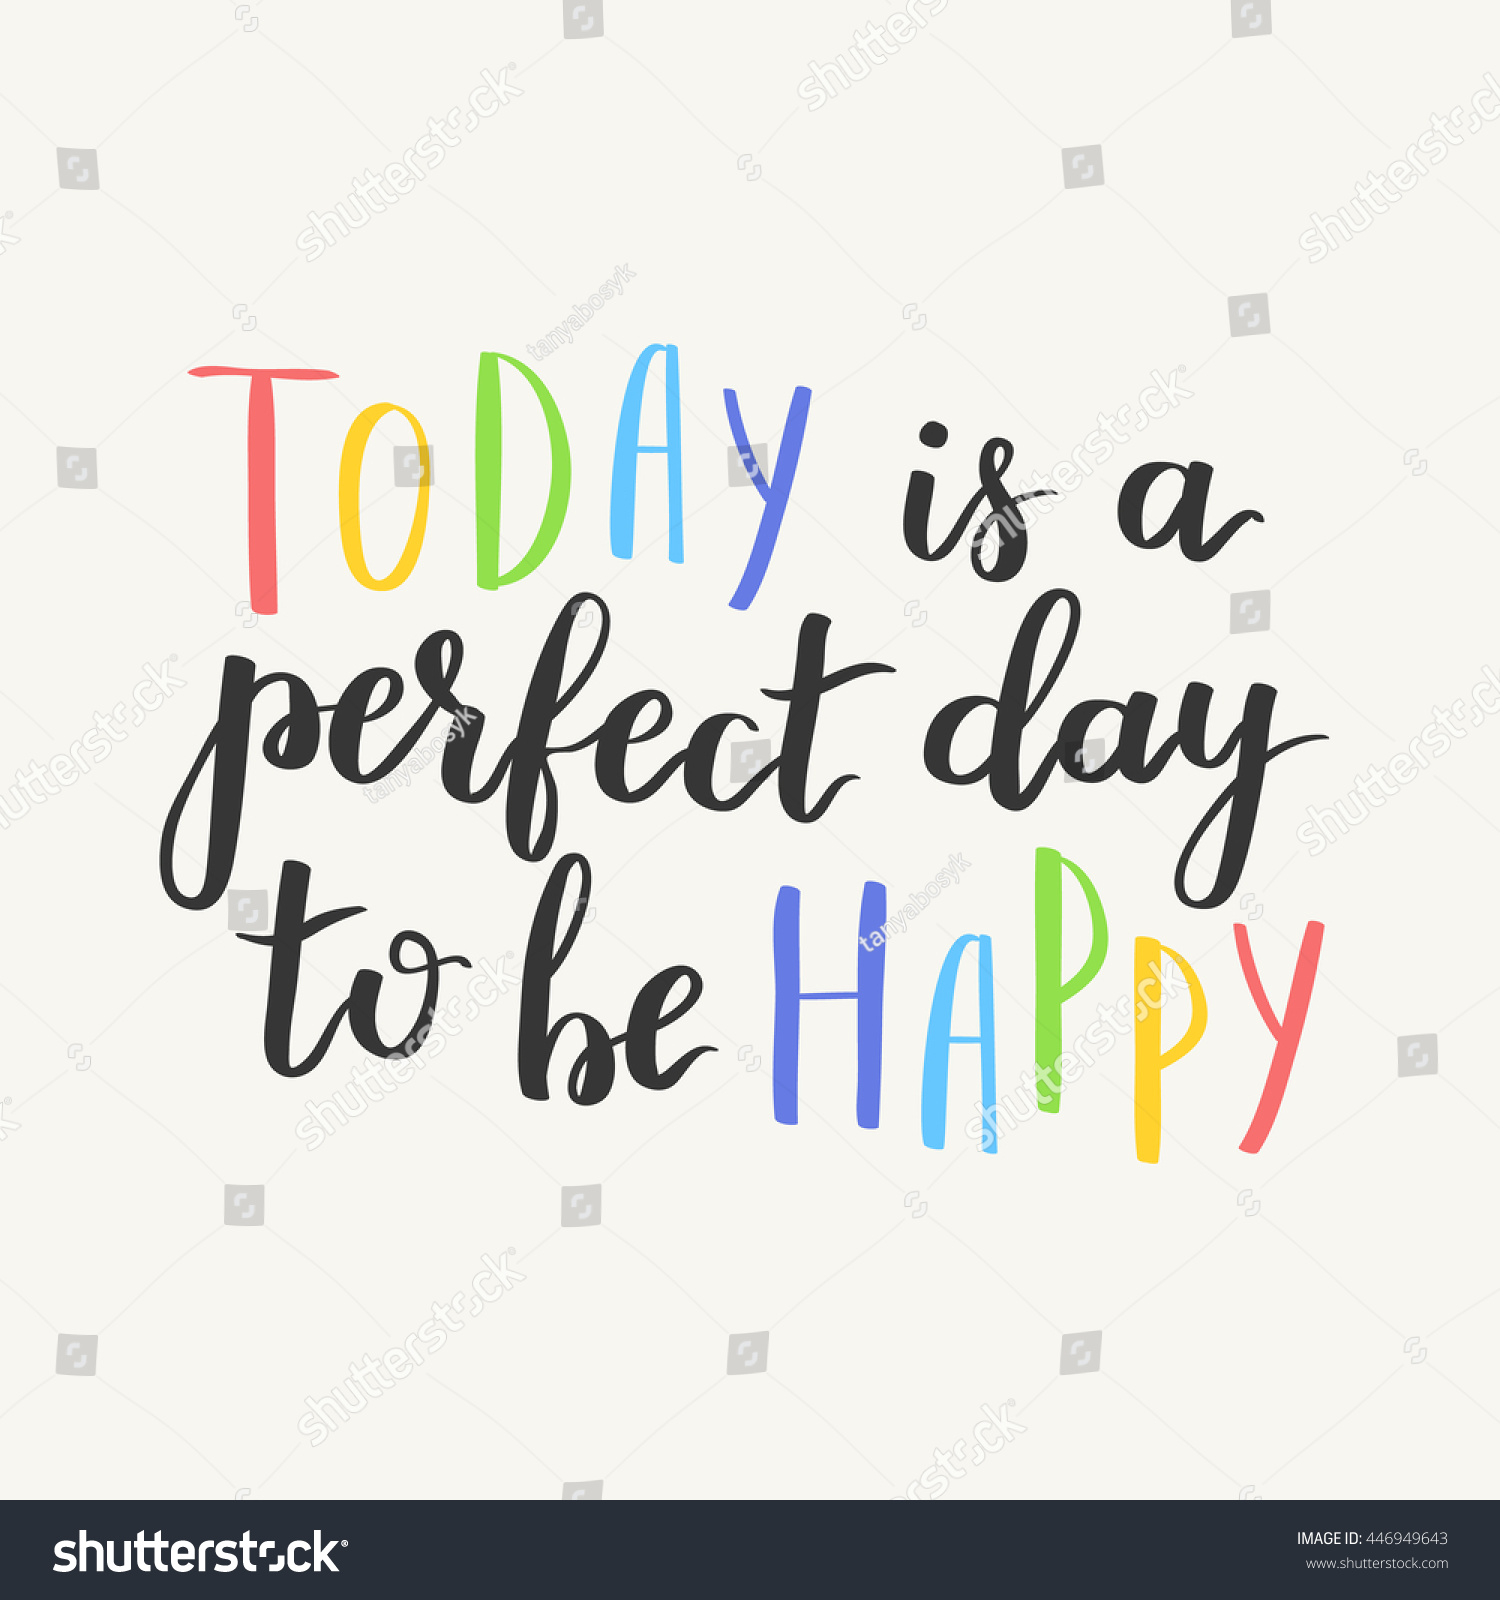 Today Perfect Day Be Happy Inspiration Stock Vector 446949643 ...